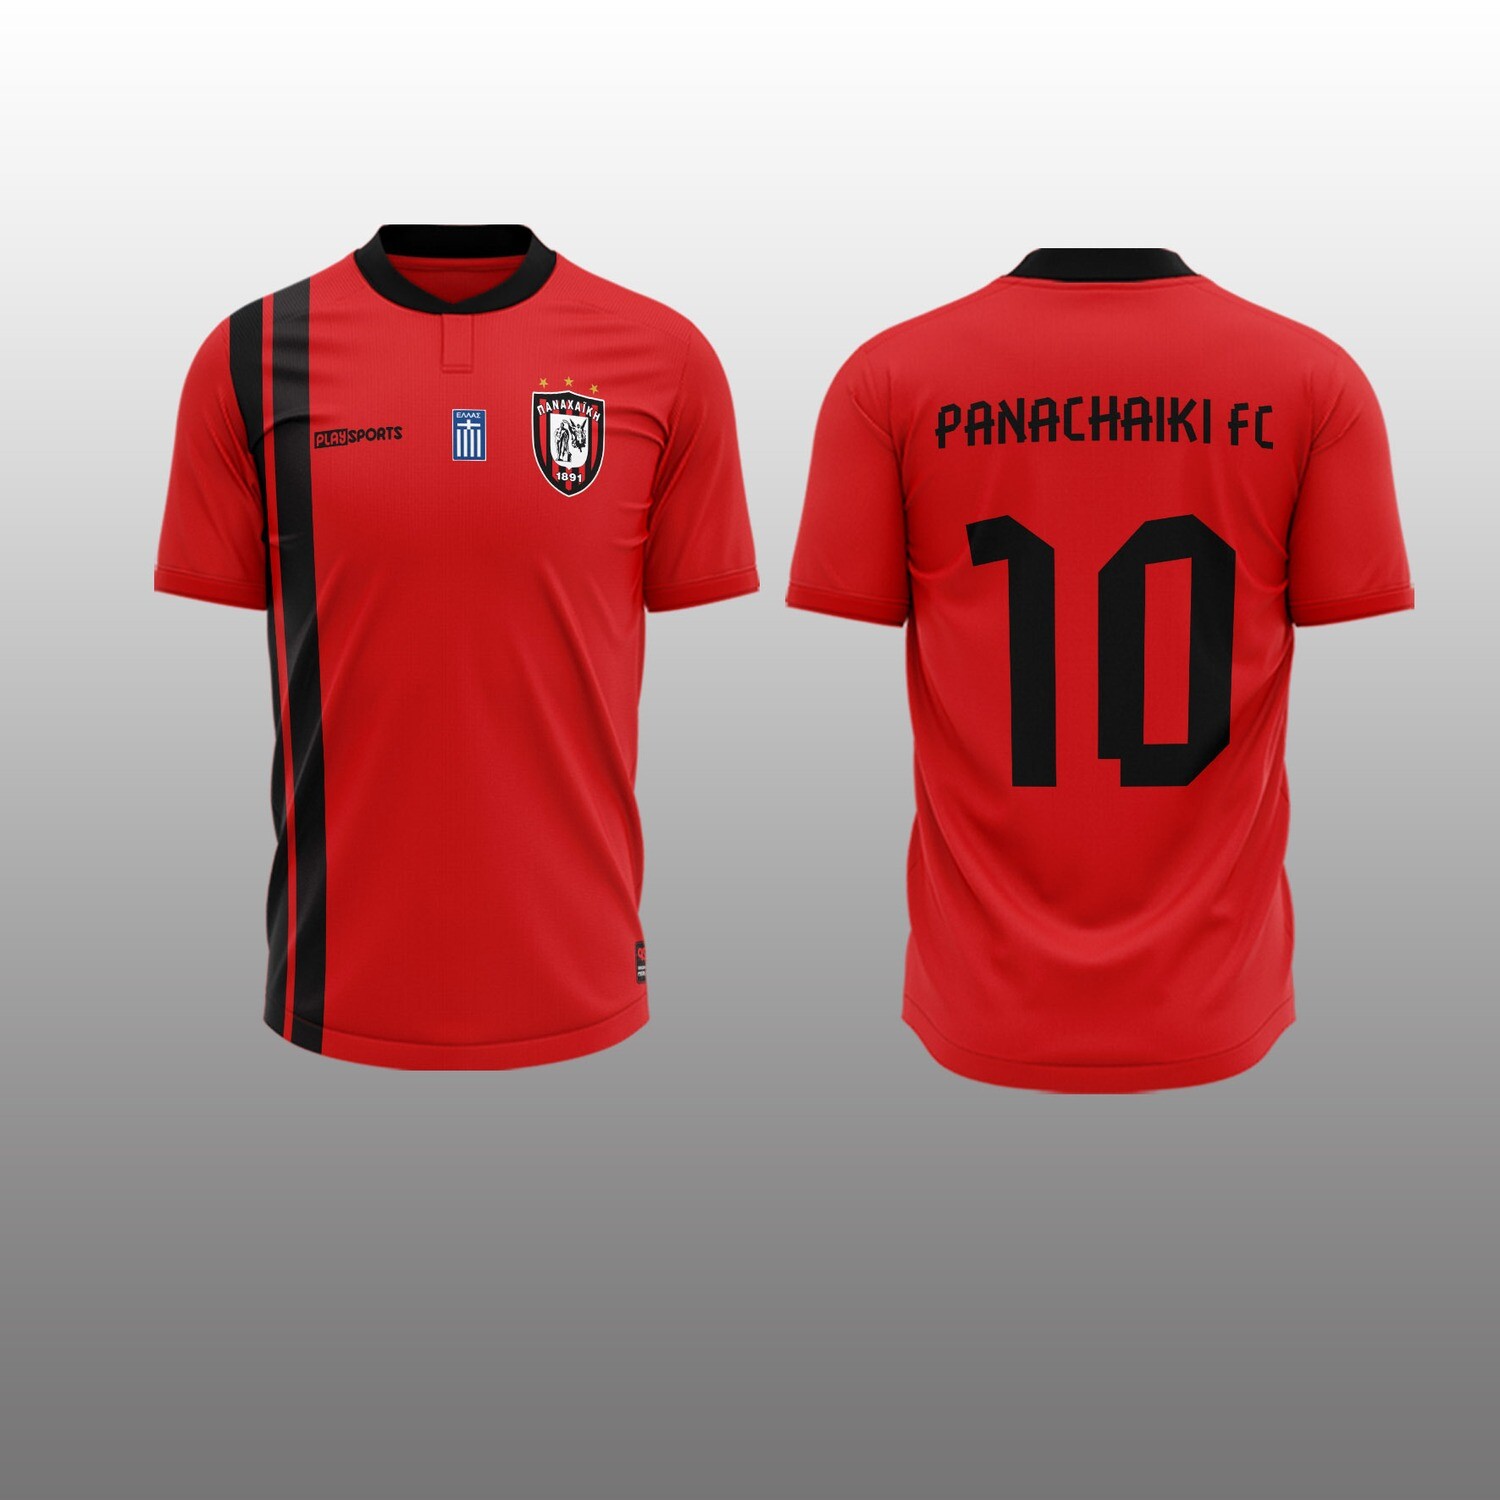 OFFICIAL KIT "1971" - PGE048